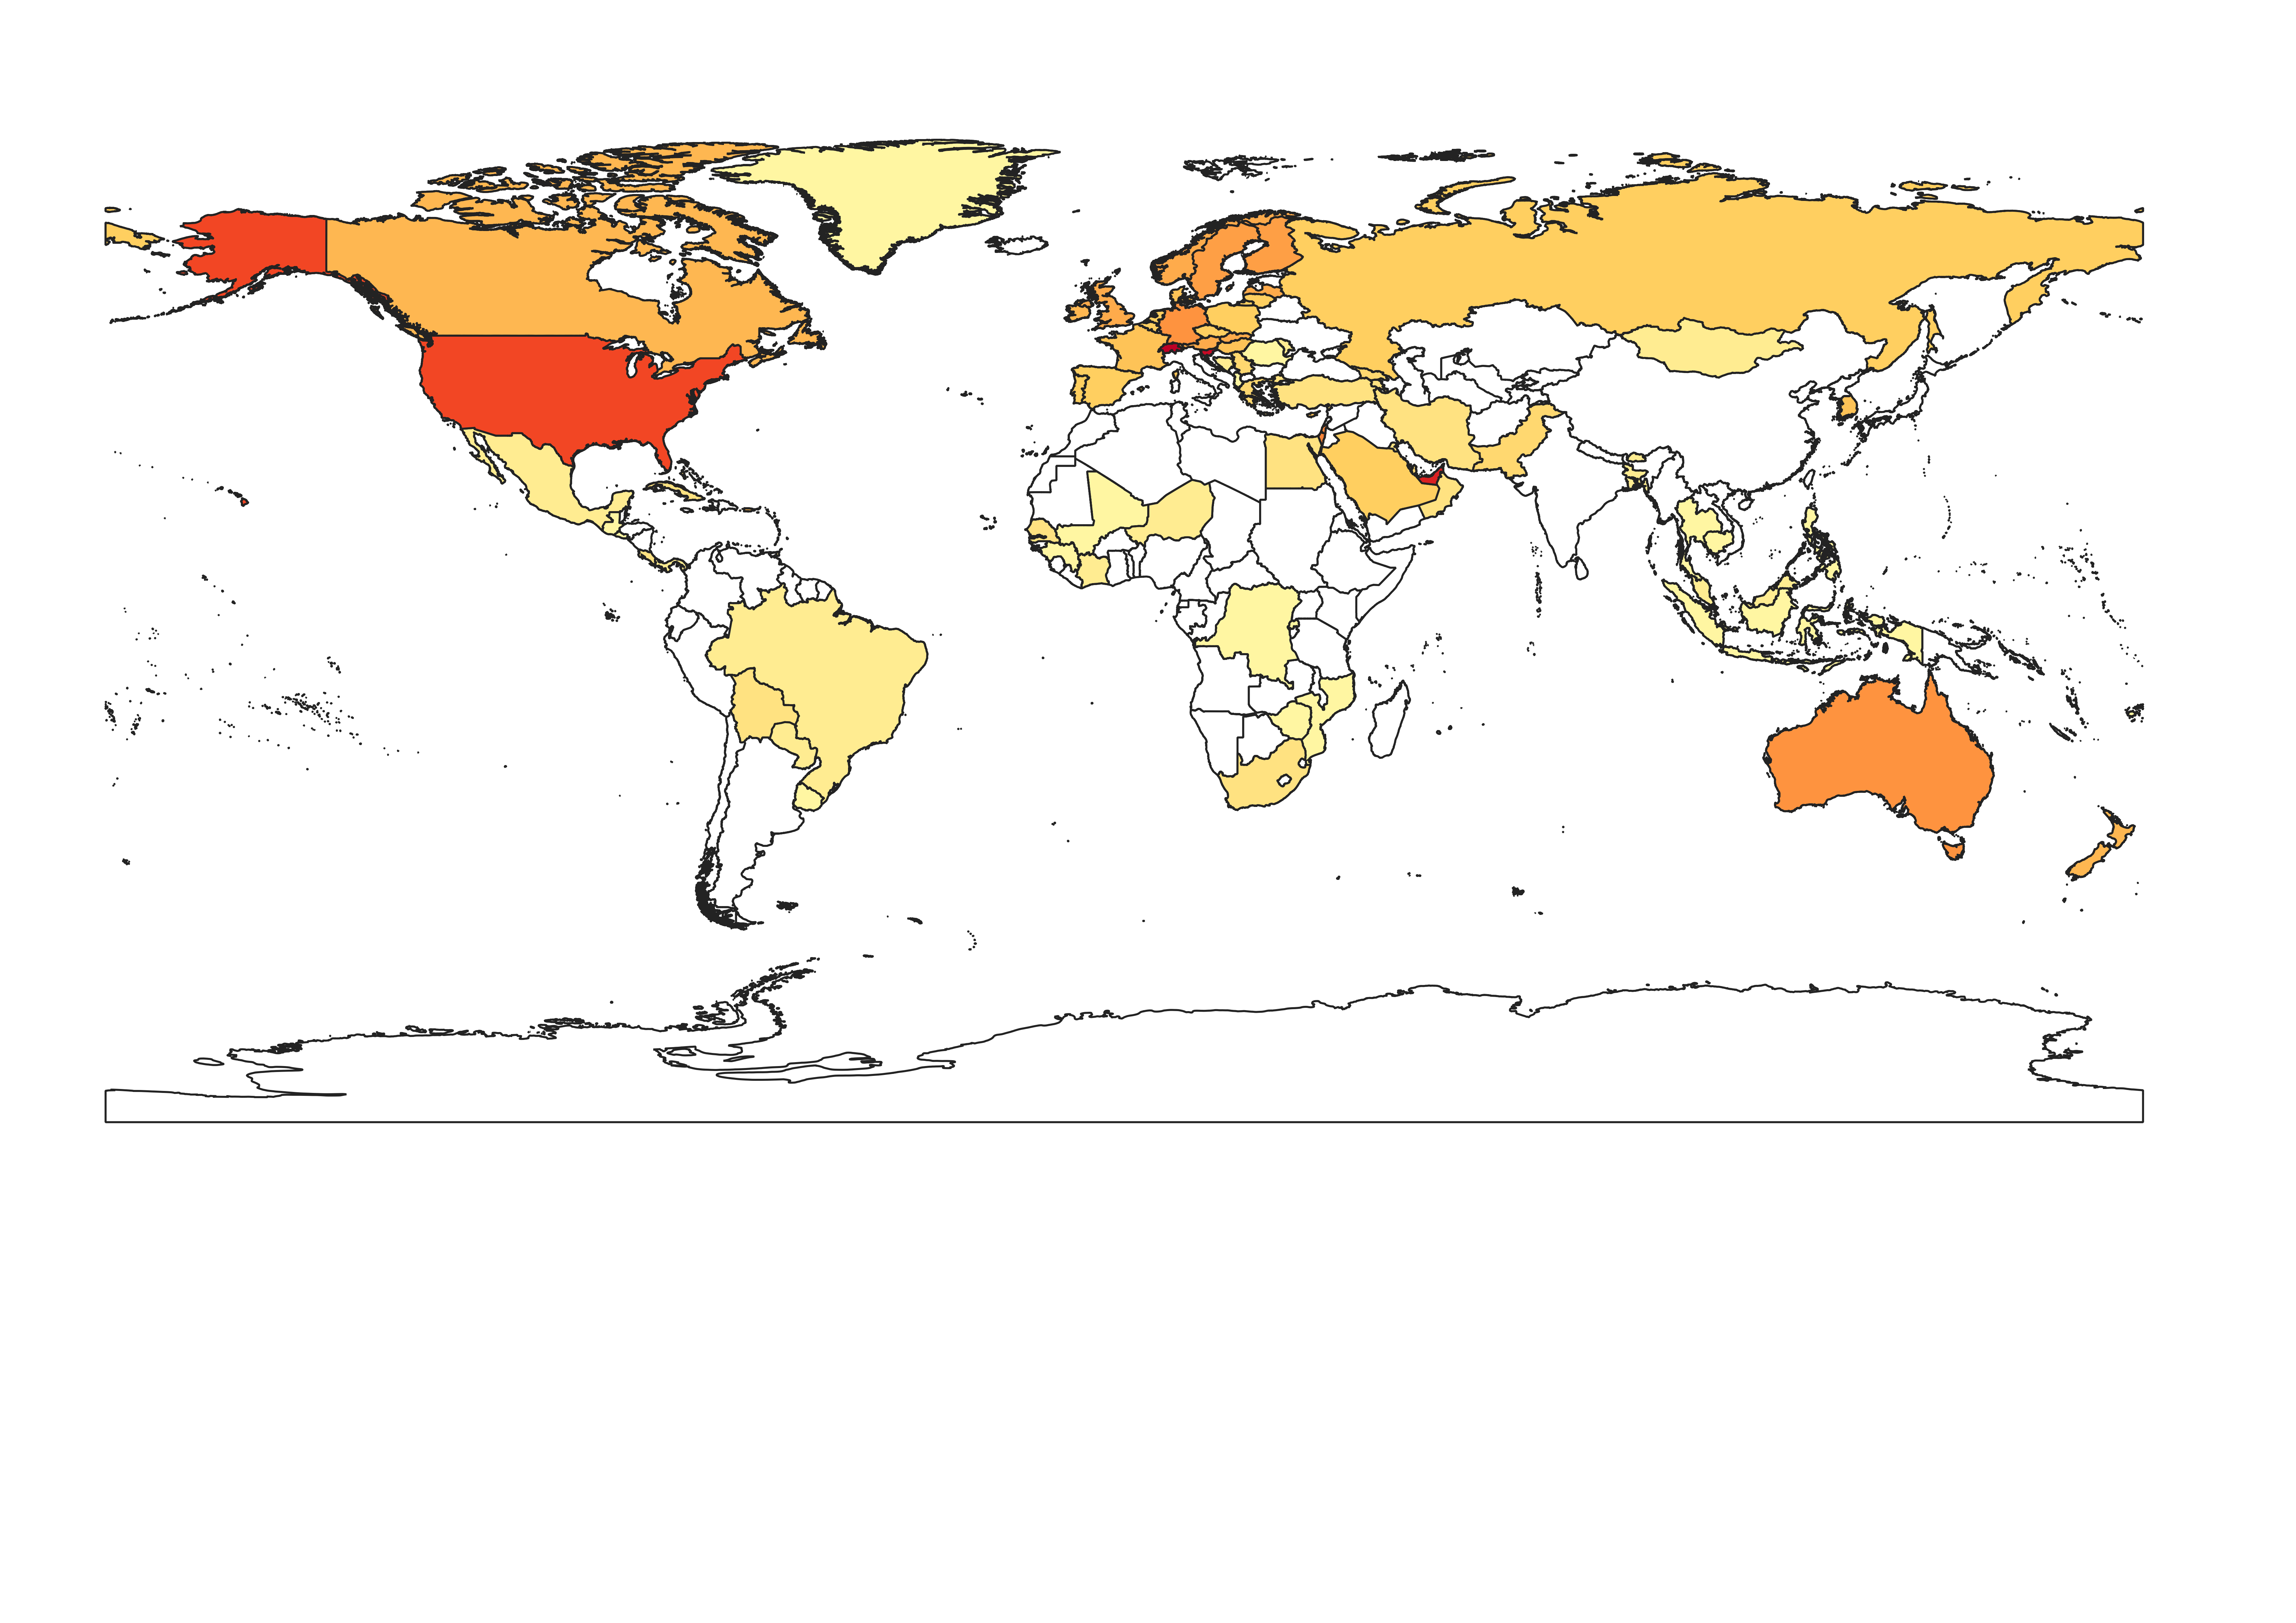 Where in the world are there most PhDs? In this map of the world, countries shaded are those that have data declaring the proportion of PhD (or equivalent) in their population (max percentage between 2010 and 2020 (Data from the World Bank). This ranges from 2.97% in Switzerland (dark red) to 0.02% in DR Congo (light yellow). Notably, there is no data held in these years for many countries in Asia, Africa and South America.